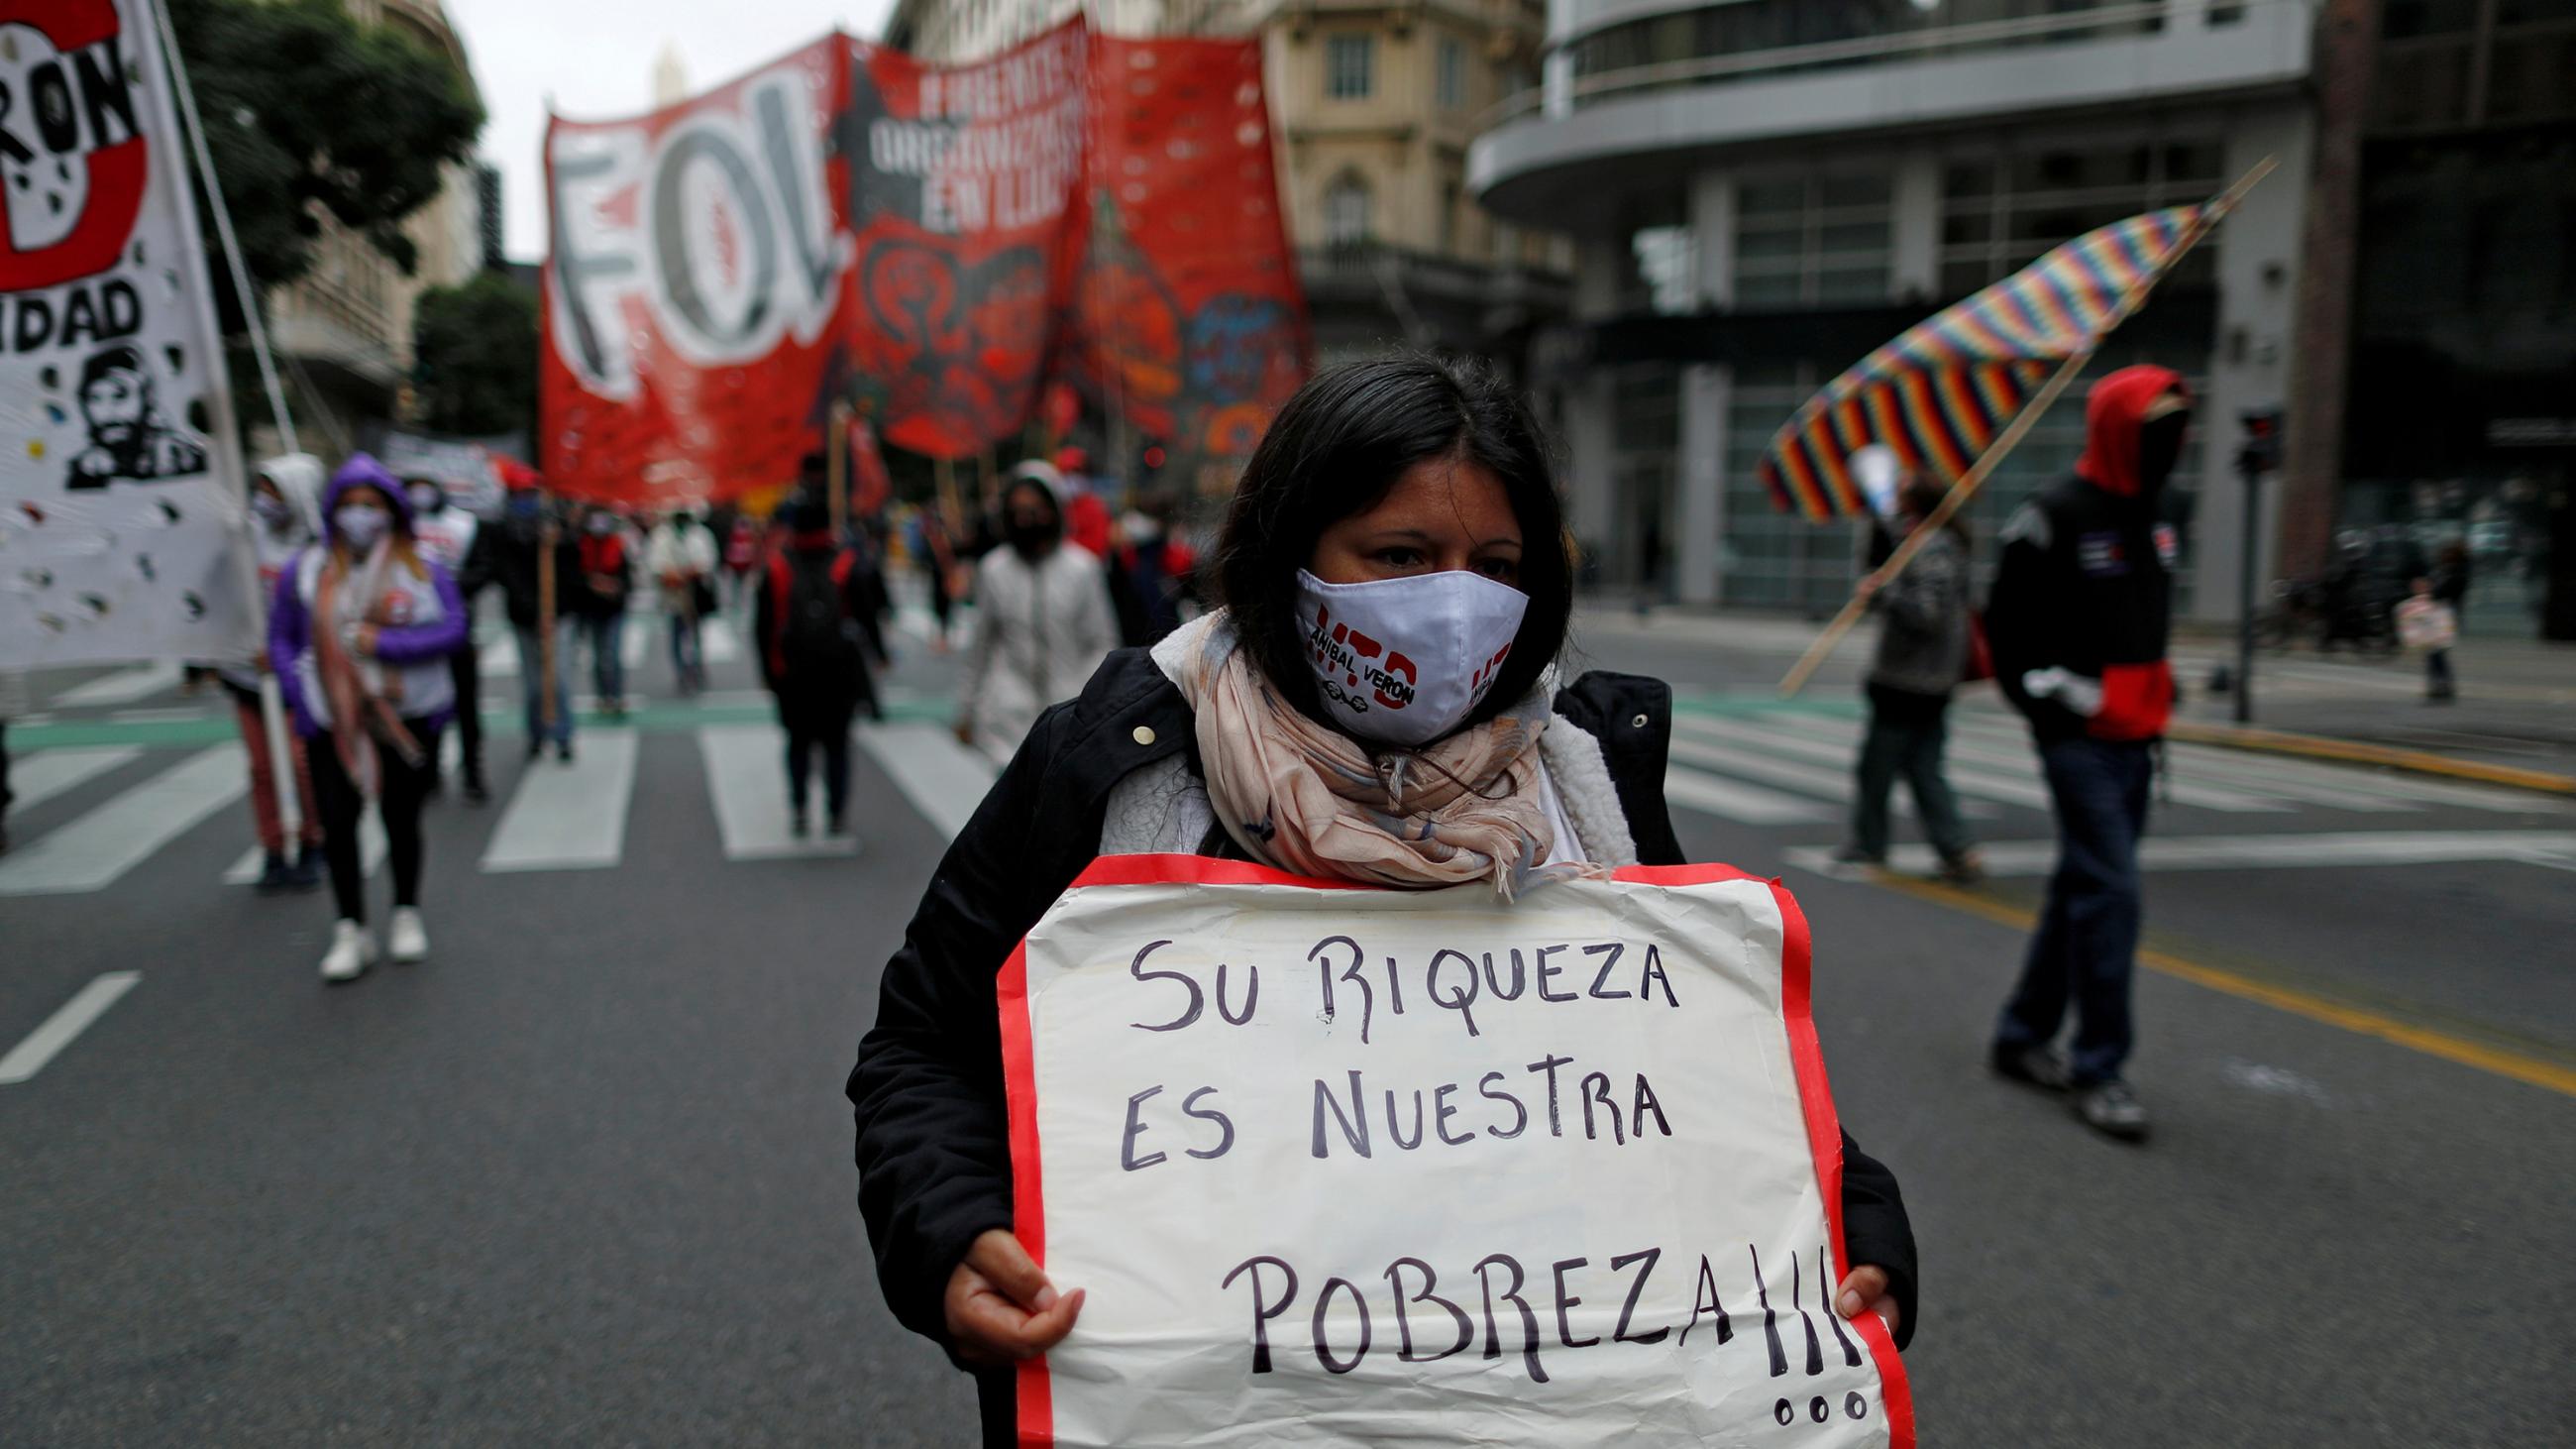 The photo shows a street protest with a woman in front holding a sign that reads "their richness is our poverty." 